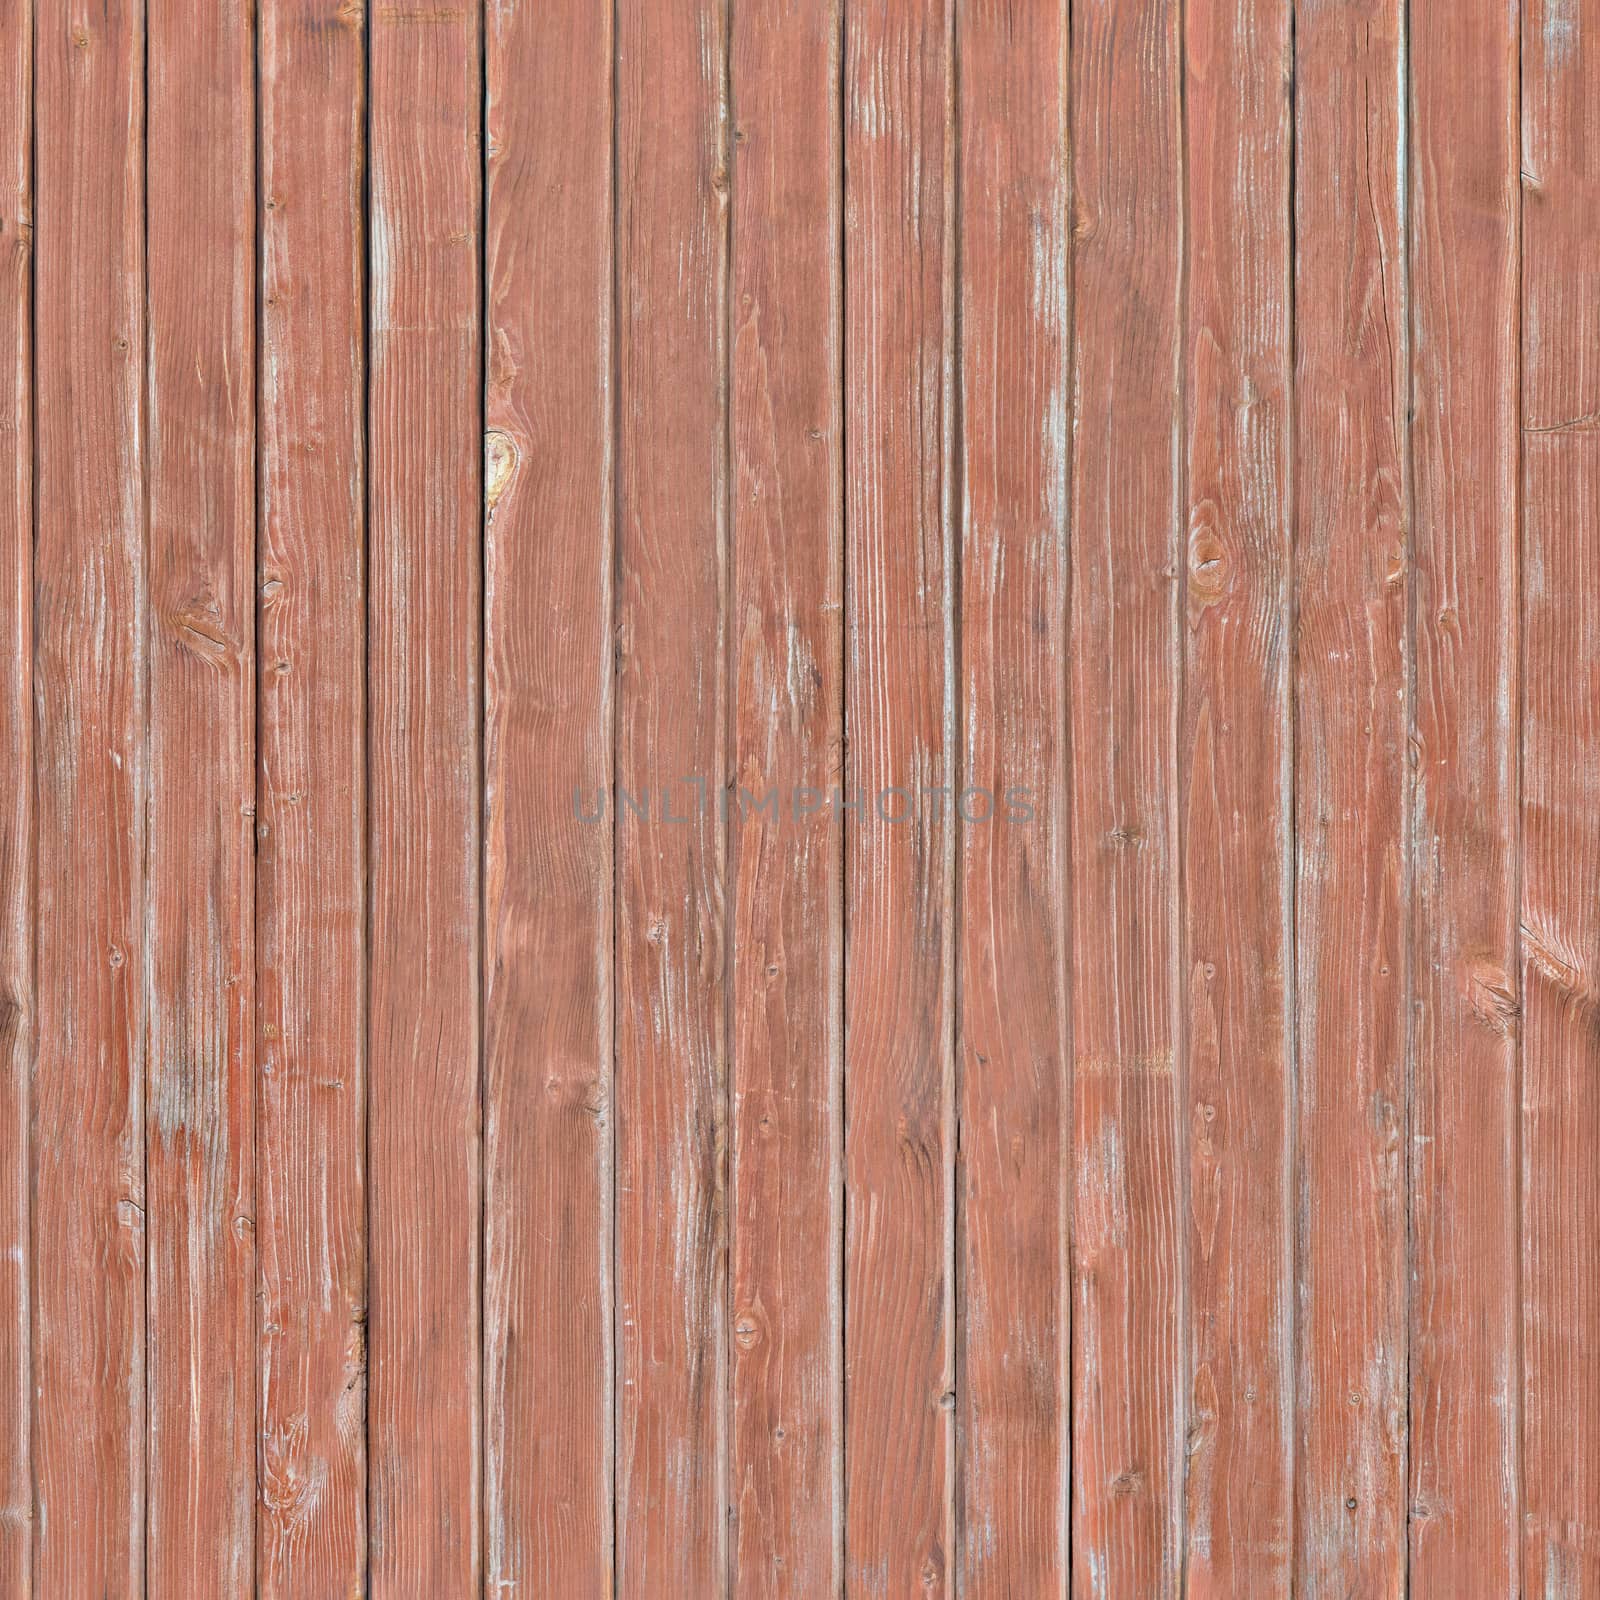 Outdated fence boards with peeling red paint on it.Background or texture